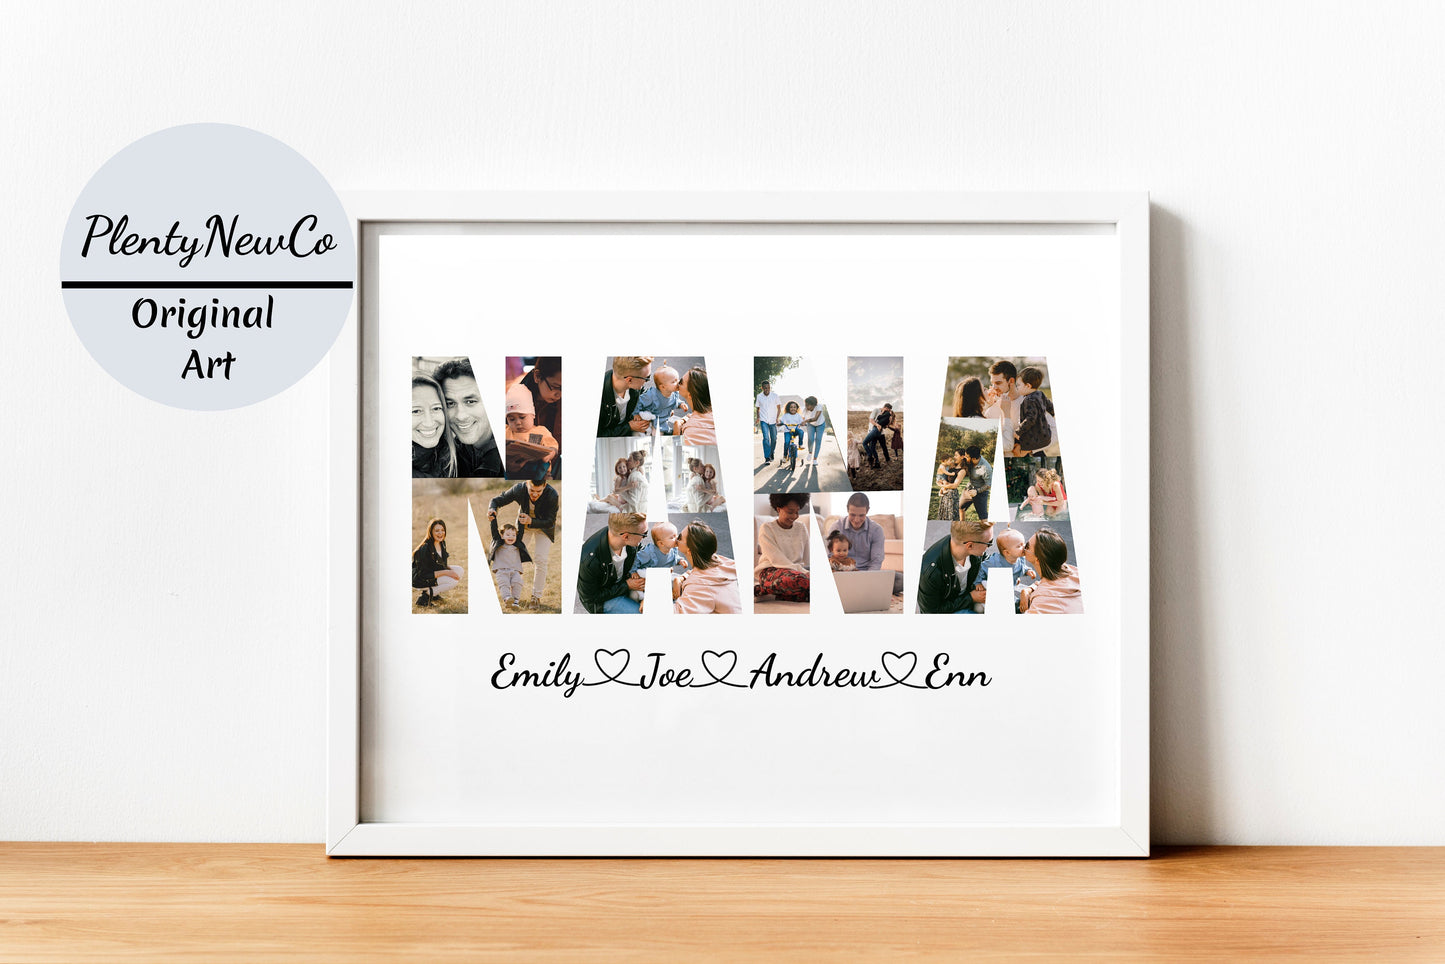 Custom Nana Photo Collage, Personalized Photo Collage, Custom Collage, Gift For Grandma, Mothers Day Gift, Birthday Present, Digital File